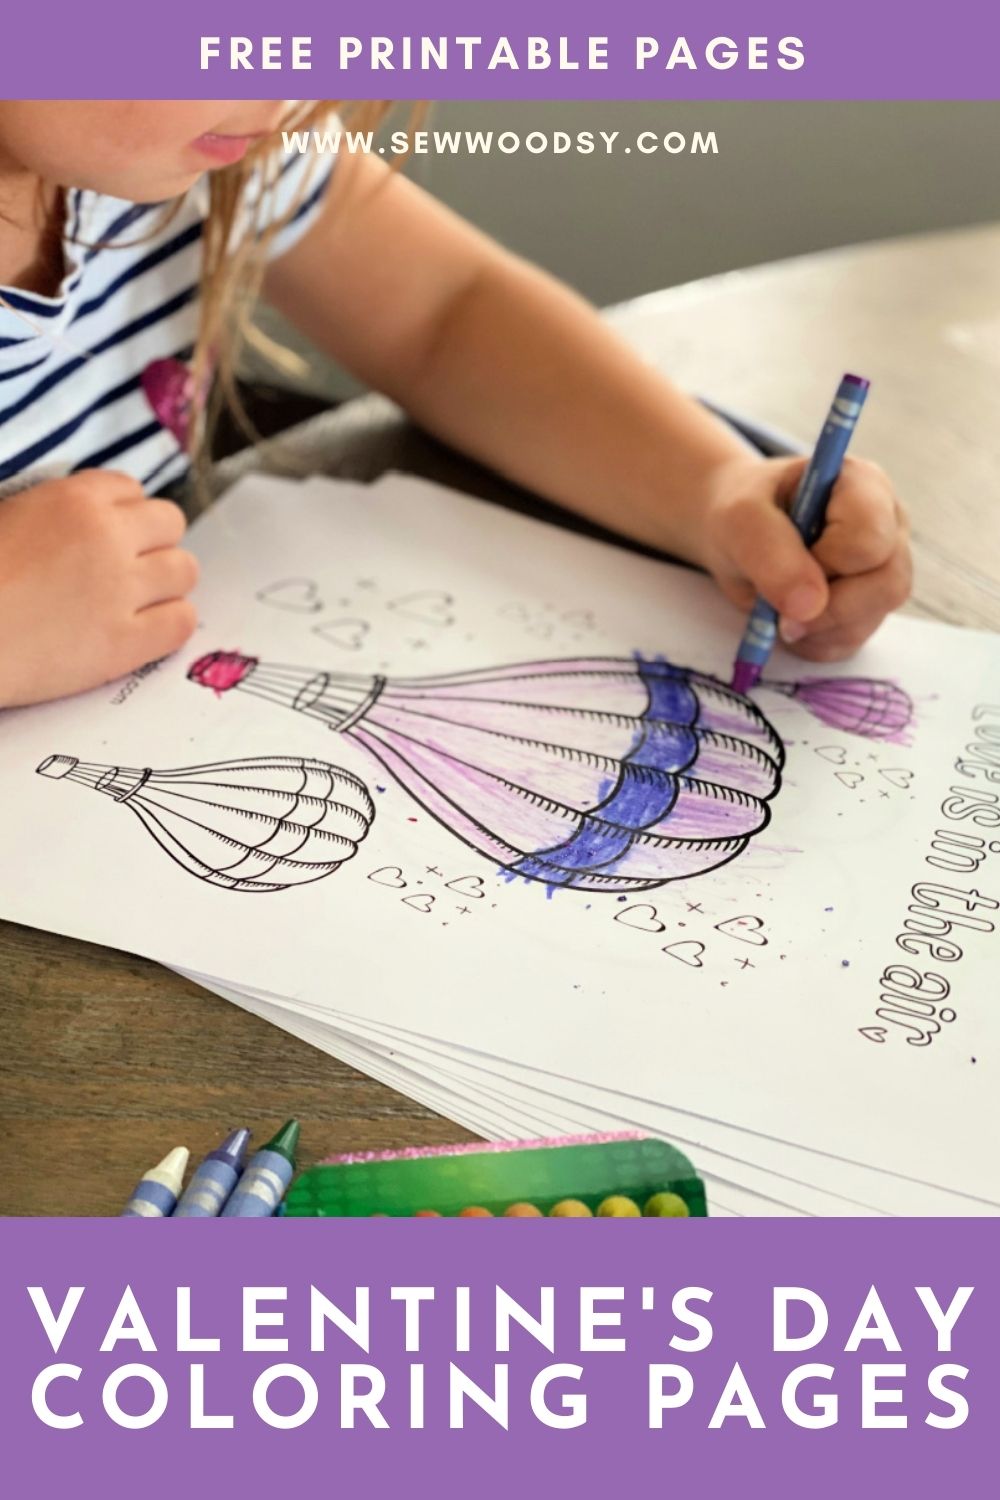 A little girl coloring a hot air balloon purple with blog post title text on image.